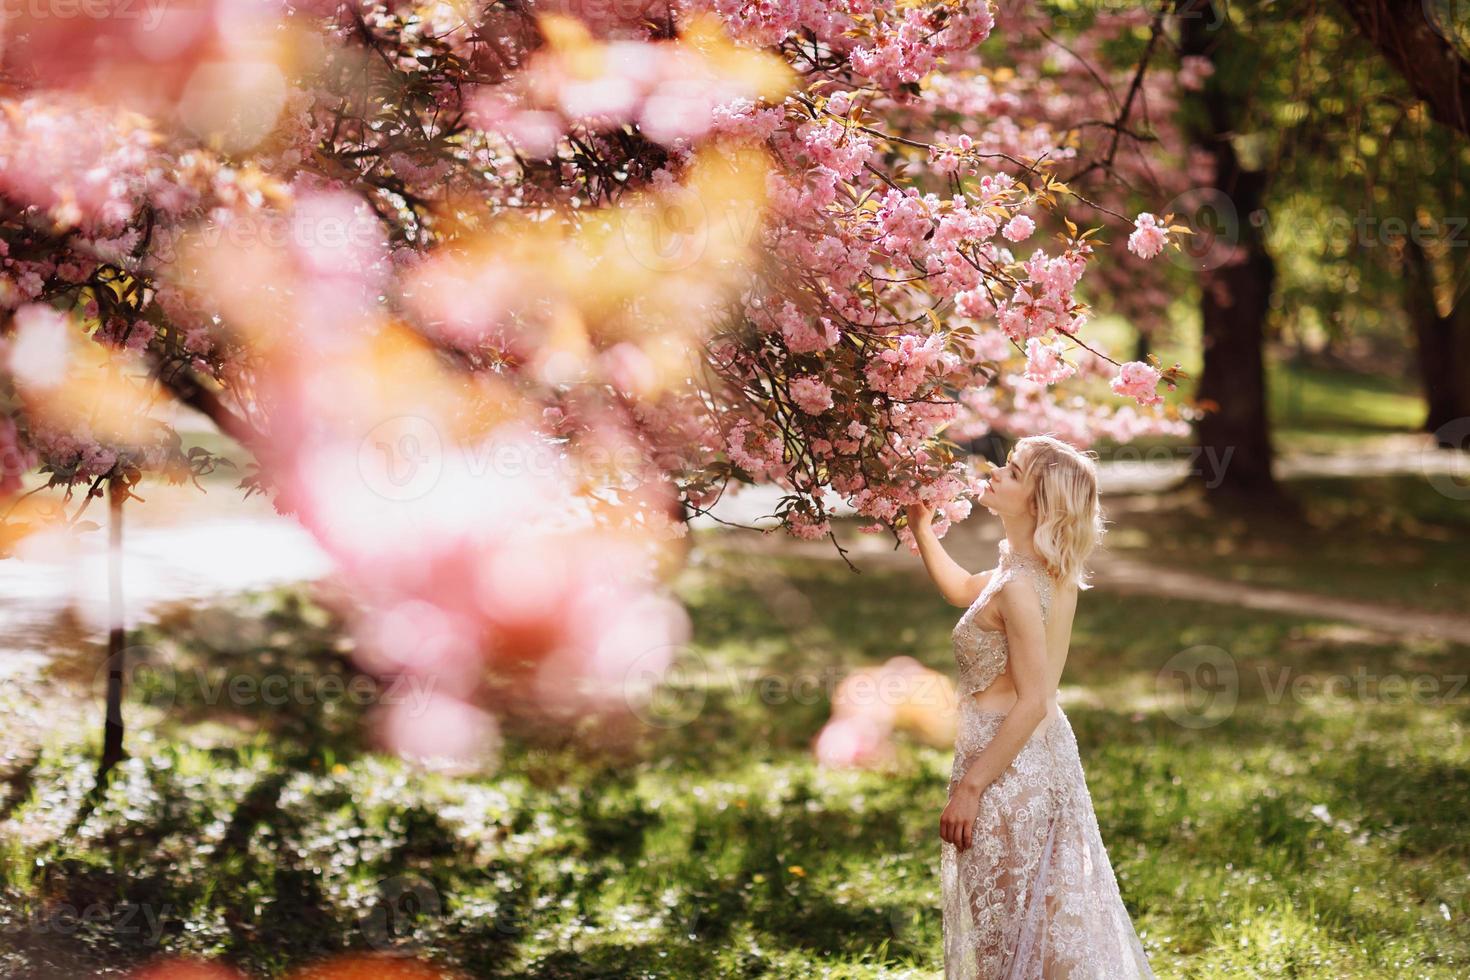 beautiful girl enjoys the scent of flowering tree. Portrait of beautiful woman with blooming cherry tree - girl inhales the scent of flowers with closed eyes - spring, nature and beauty concept photo